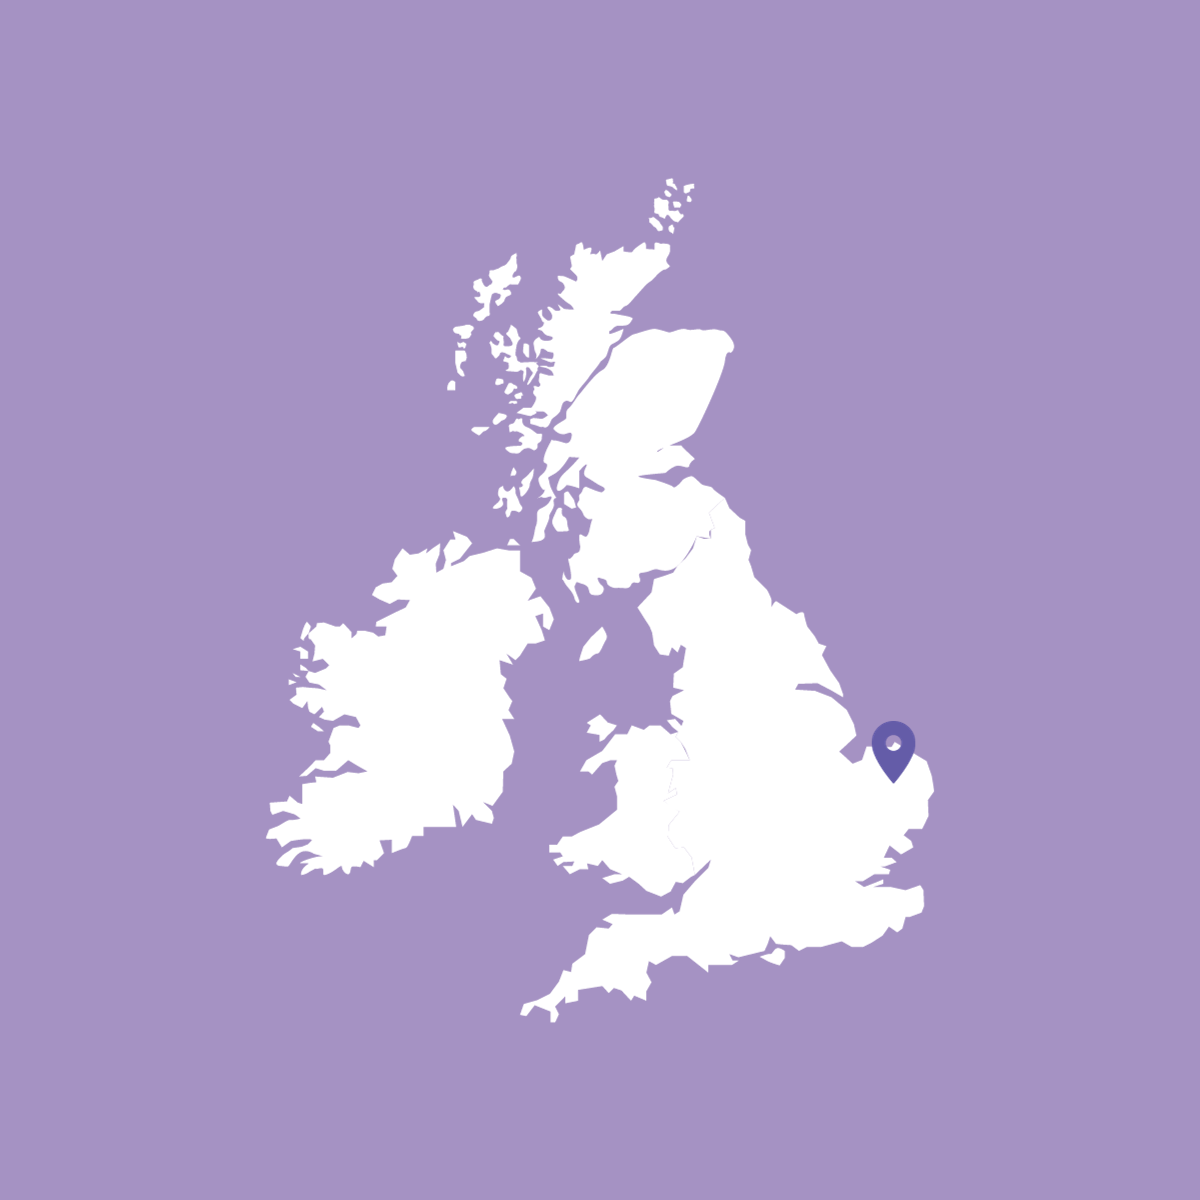 Map of the UK pin pointing Norfolk